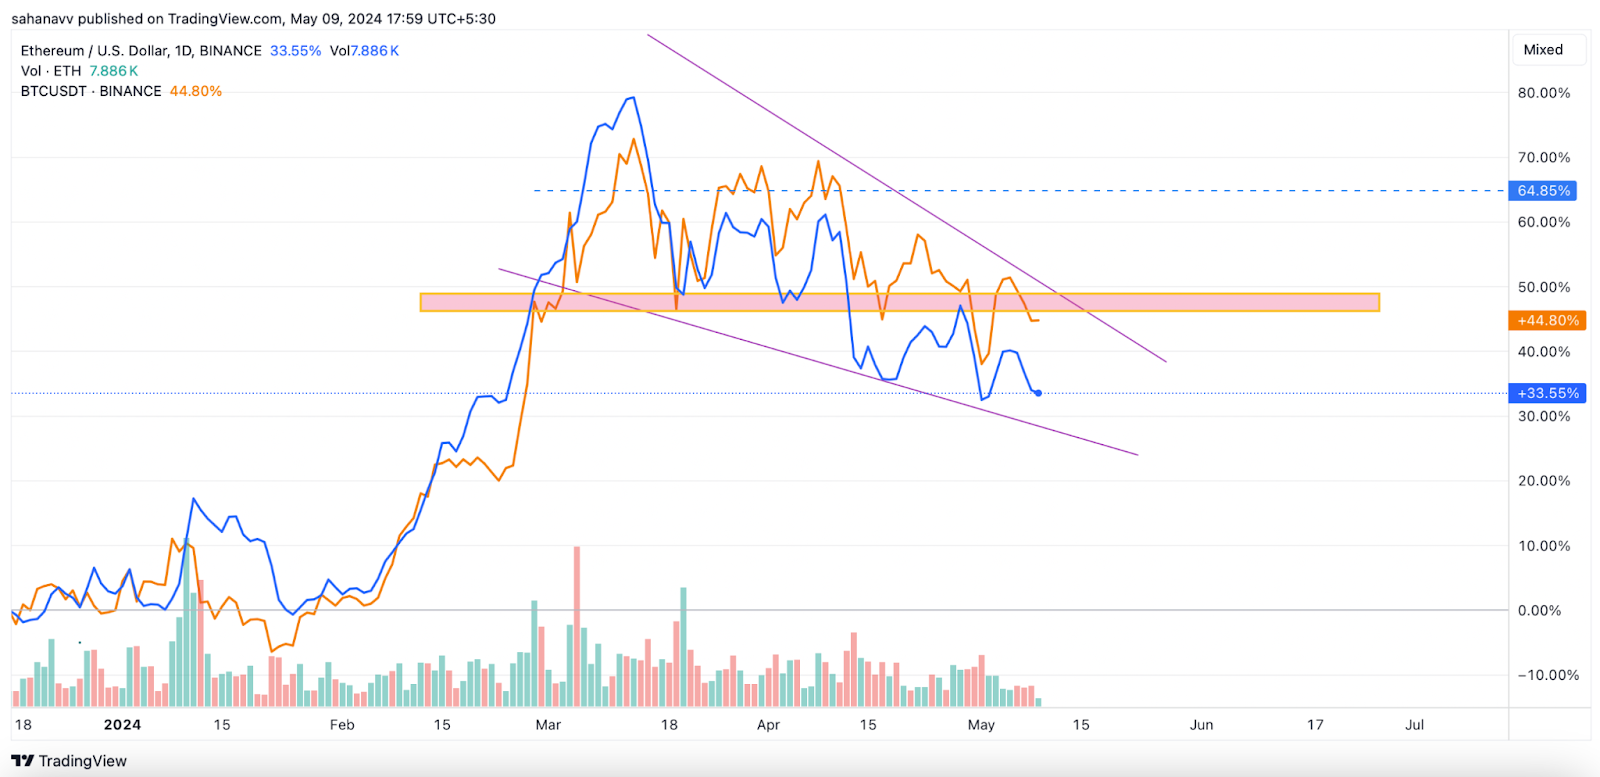 Sell Trade Triggered for Bitcoin, While Ethereum Appears to be Poised to Mark Lows Below BTC